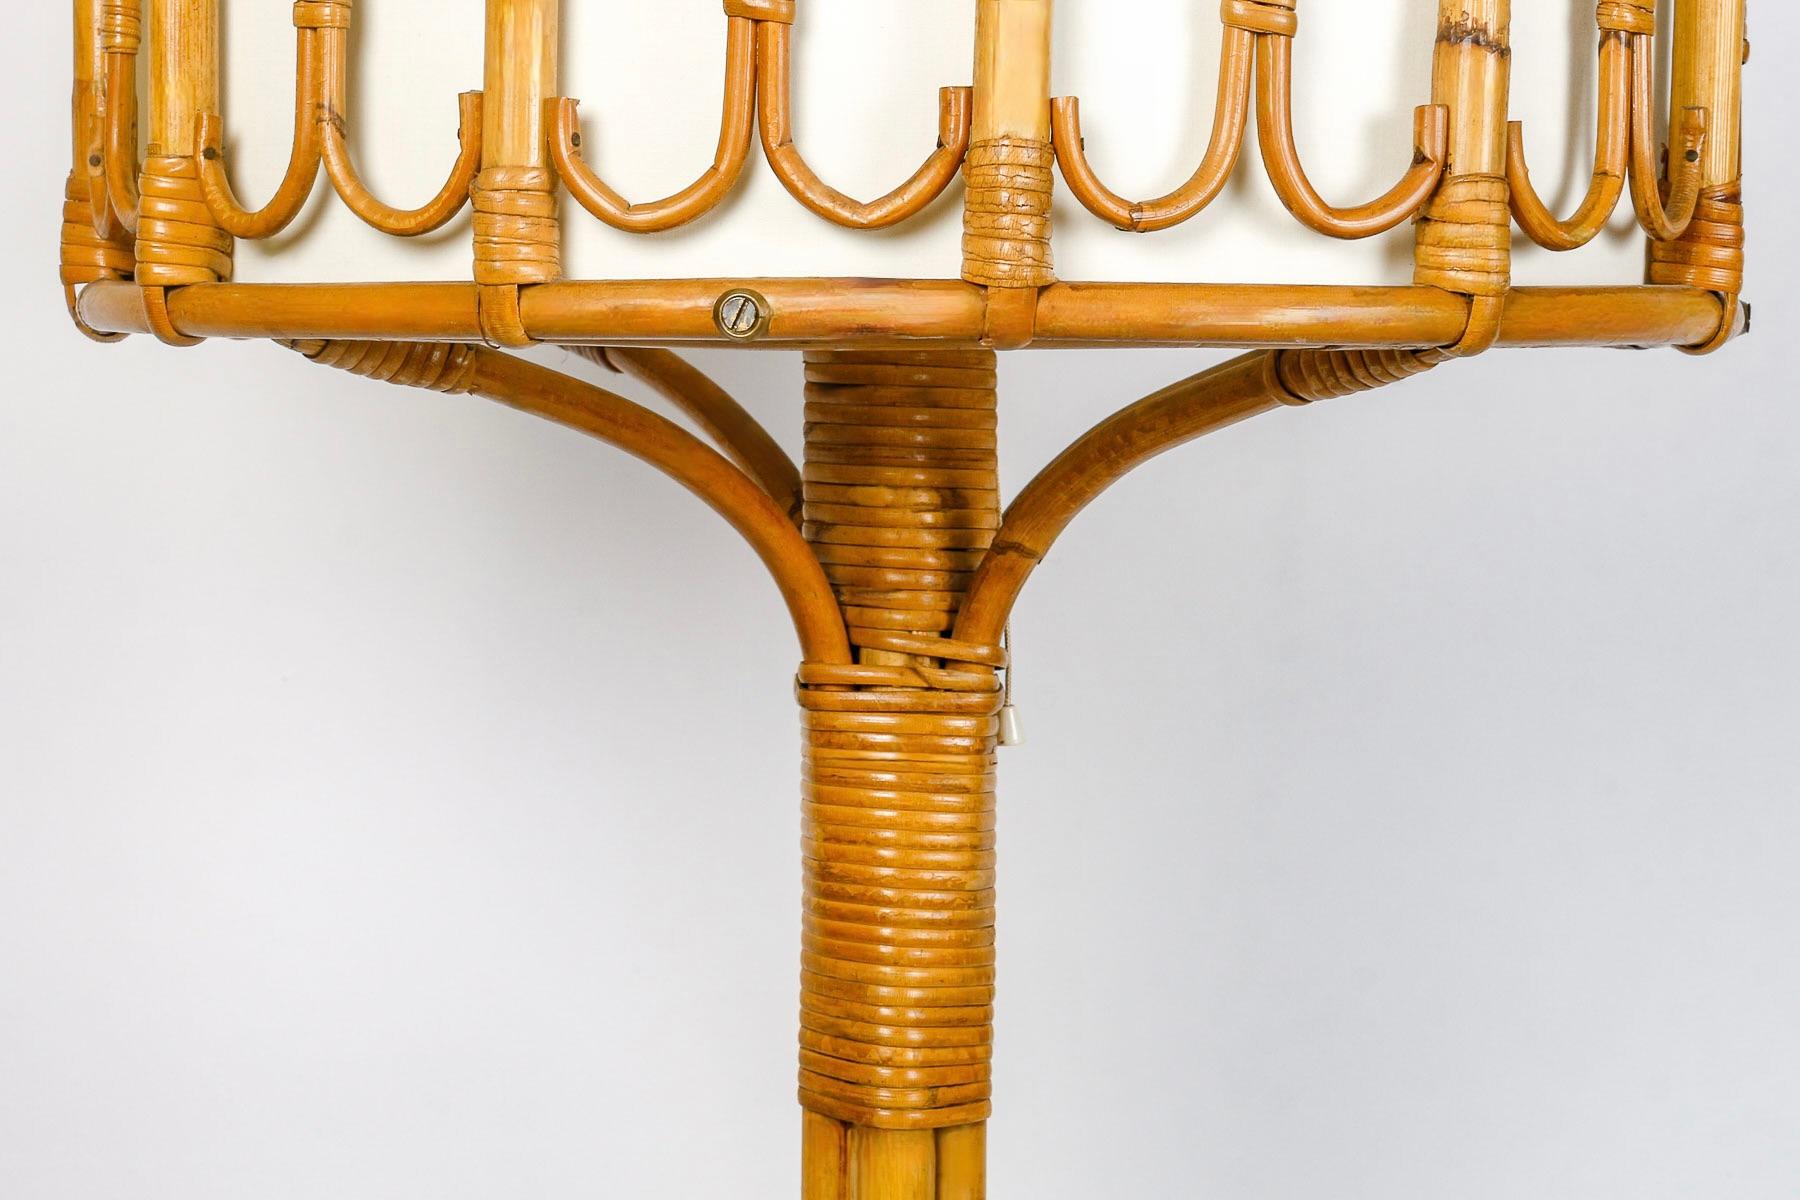 Composed of a central base formed by 4 rattan stems flared at the base, the 4 stems rest on a round base held by hoops, all made of rattan and linked together by thin rattan strips.
At the top, the central rod supports 4 rattan half-arches, on which